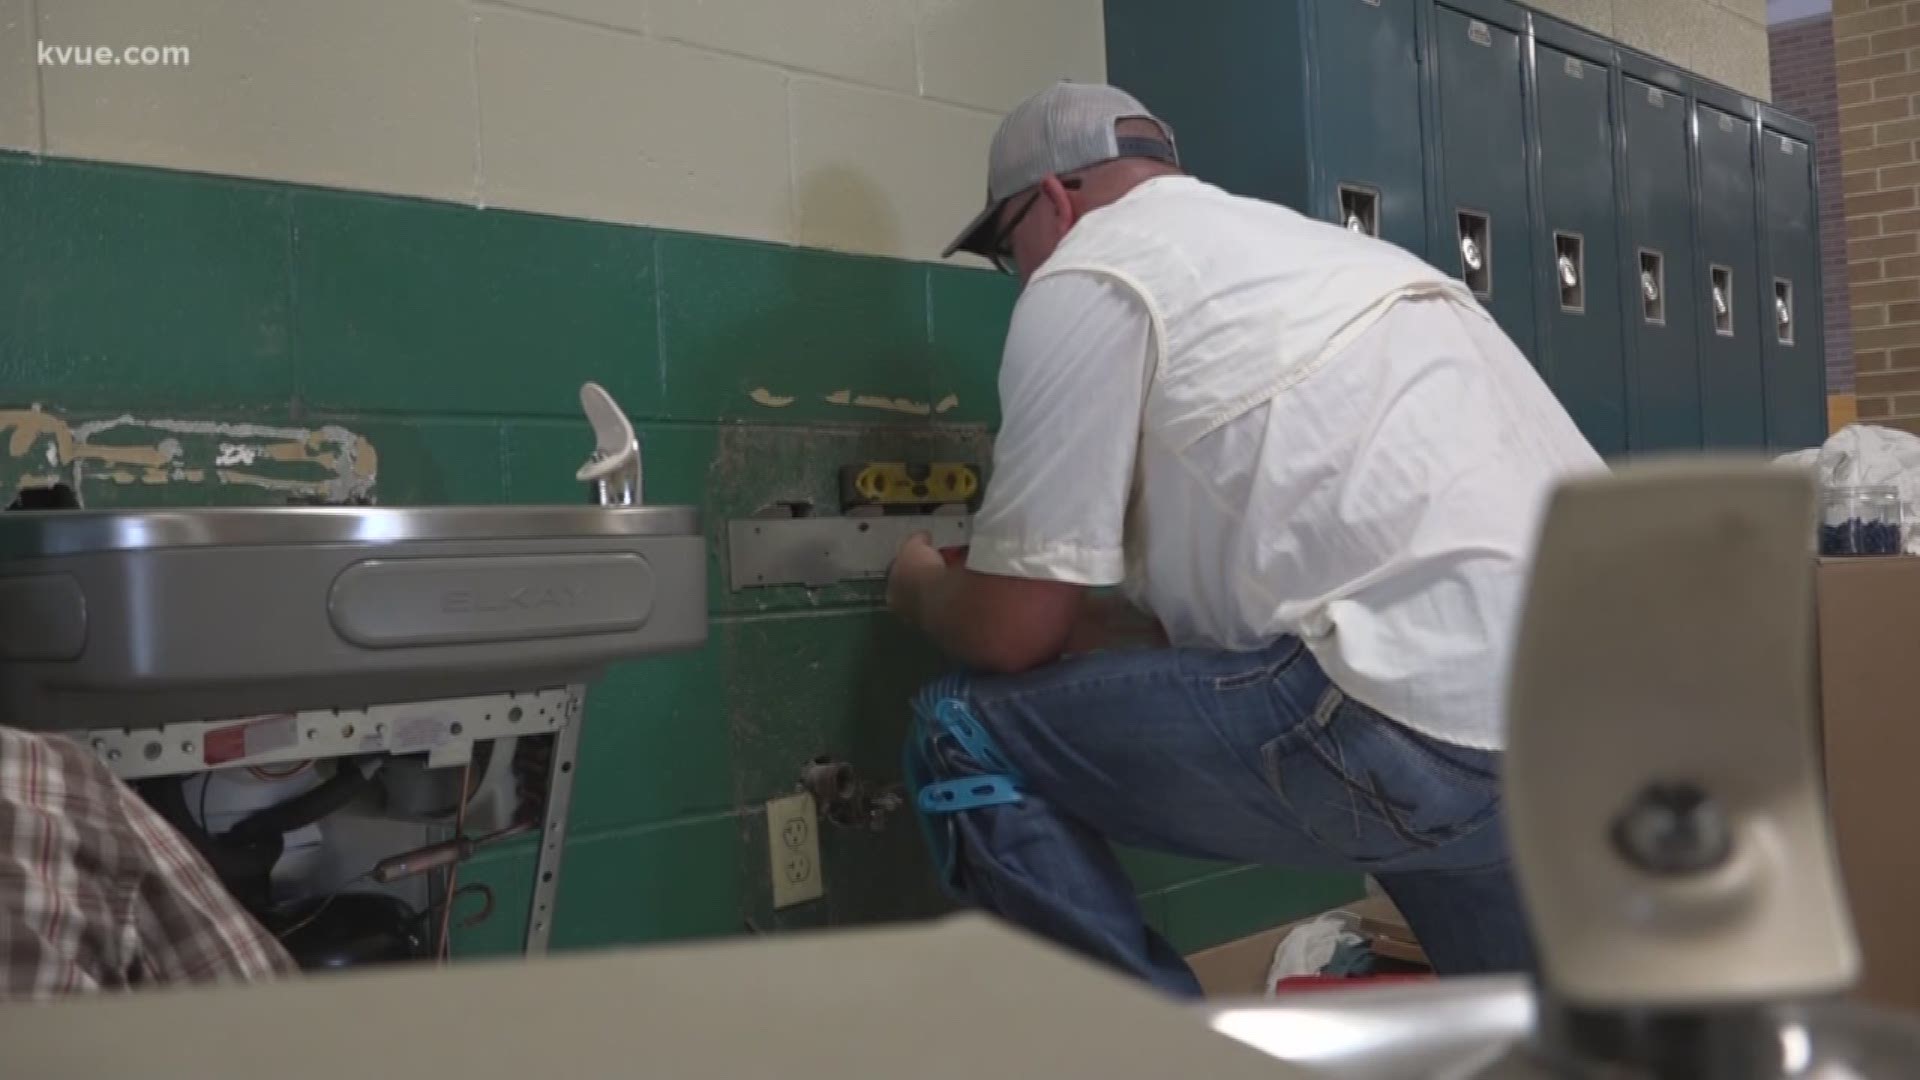 Concern over lead levels has the Austin school district changing out water fountains in some schools this week.